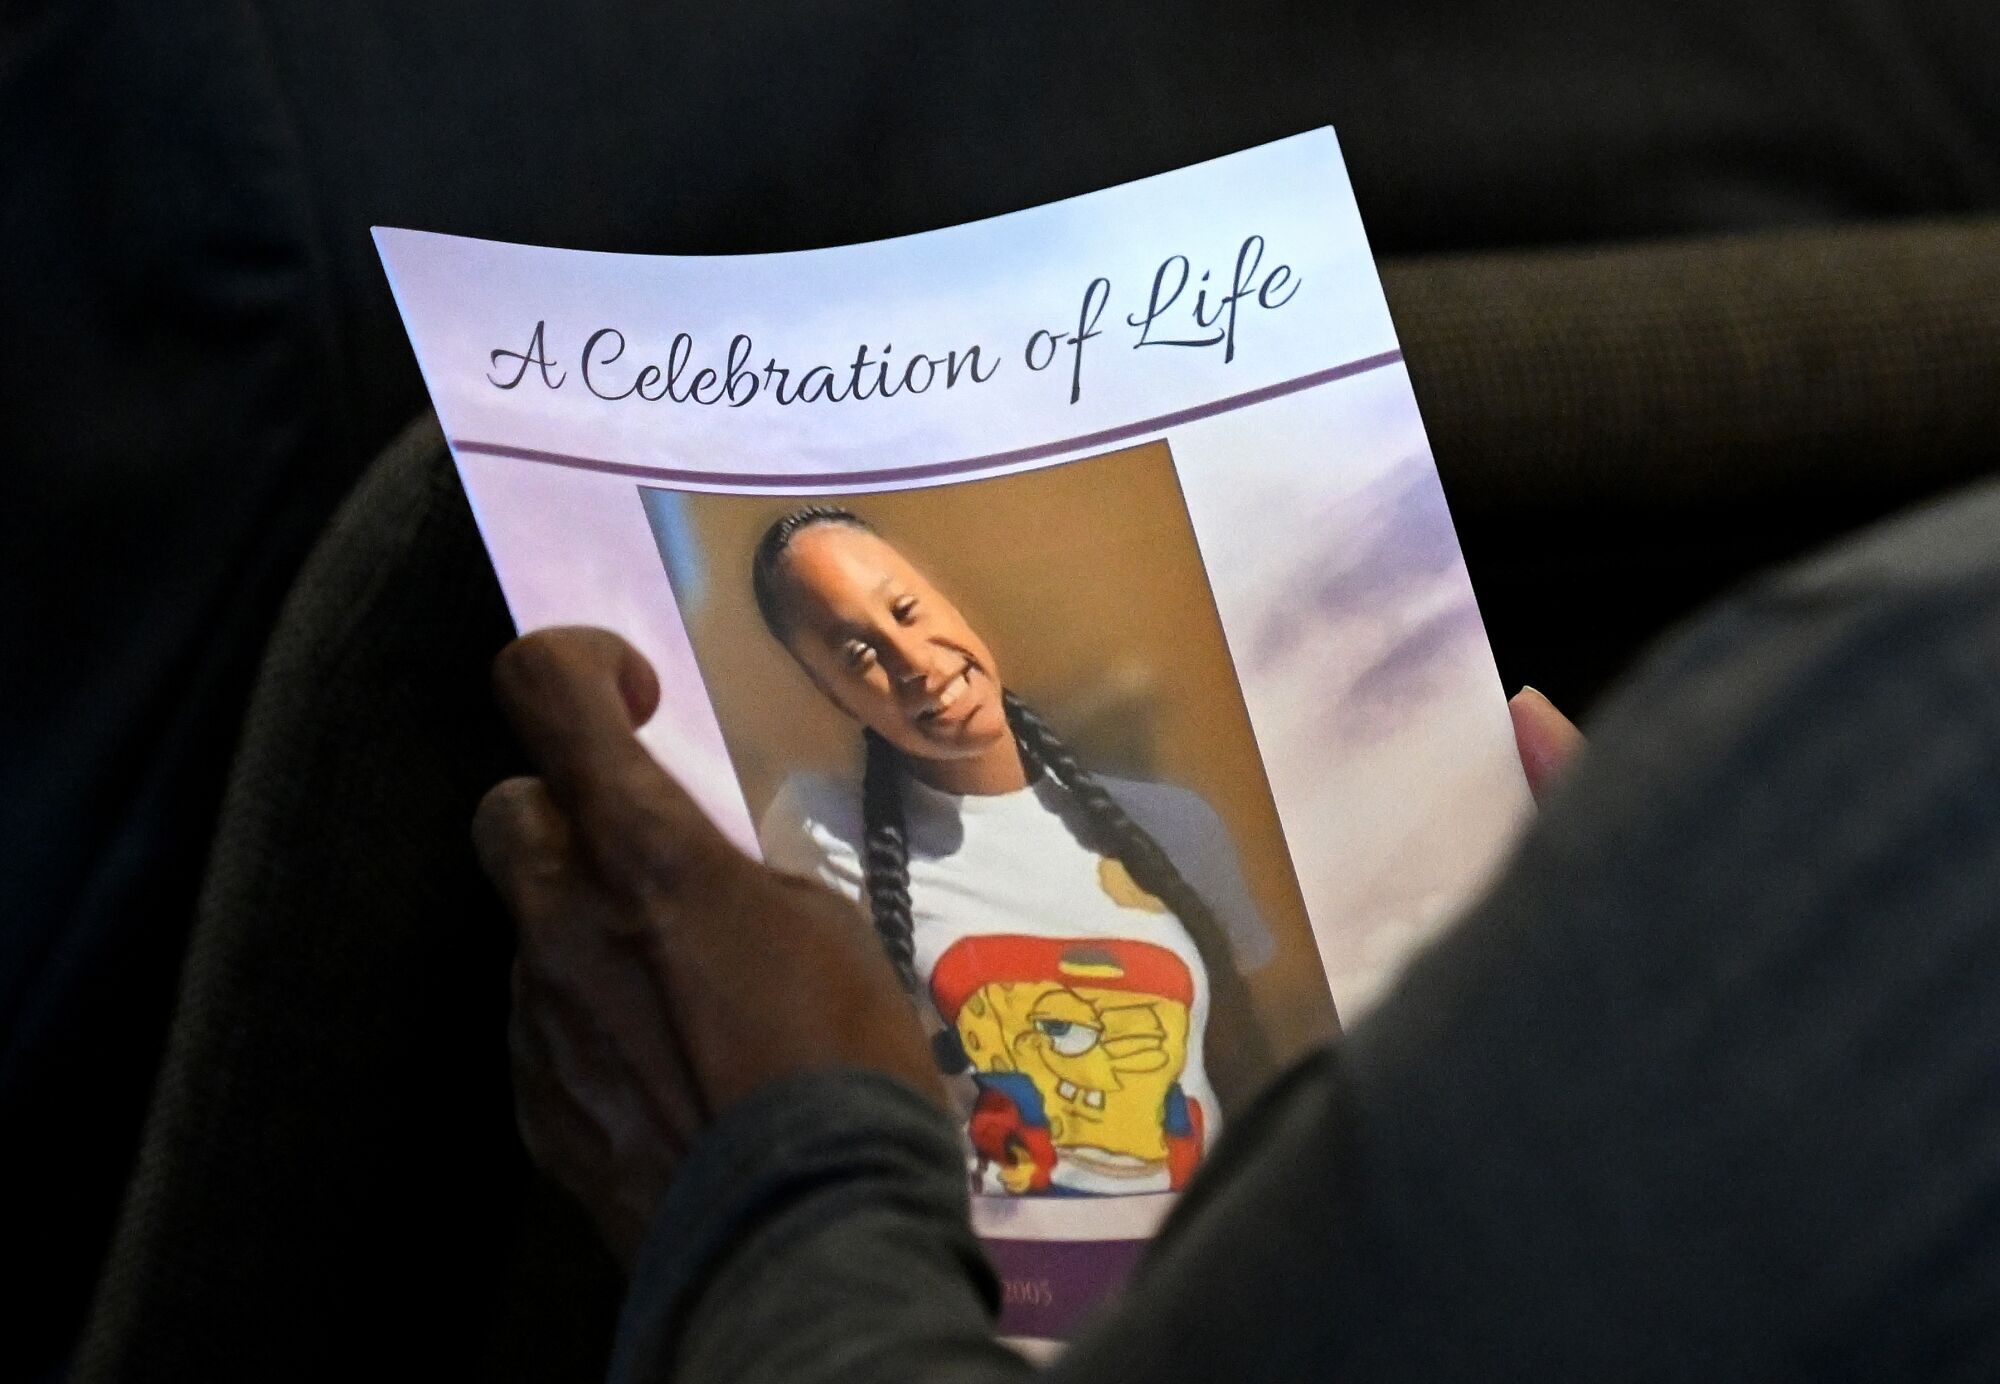 An image of Tioni Theus, seen smiling, on a funeral program. 